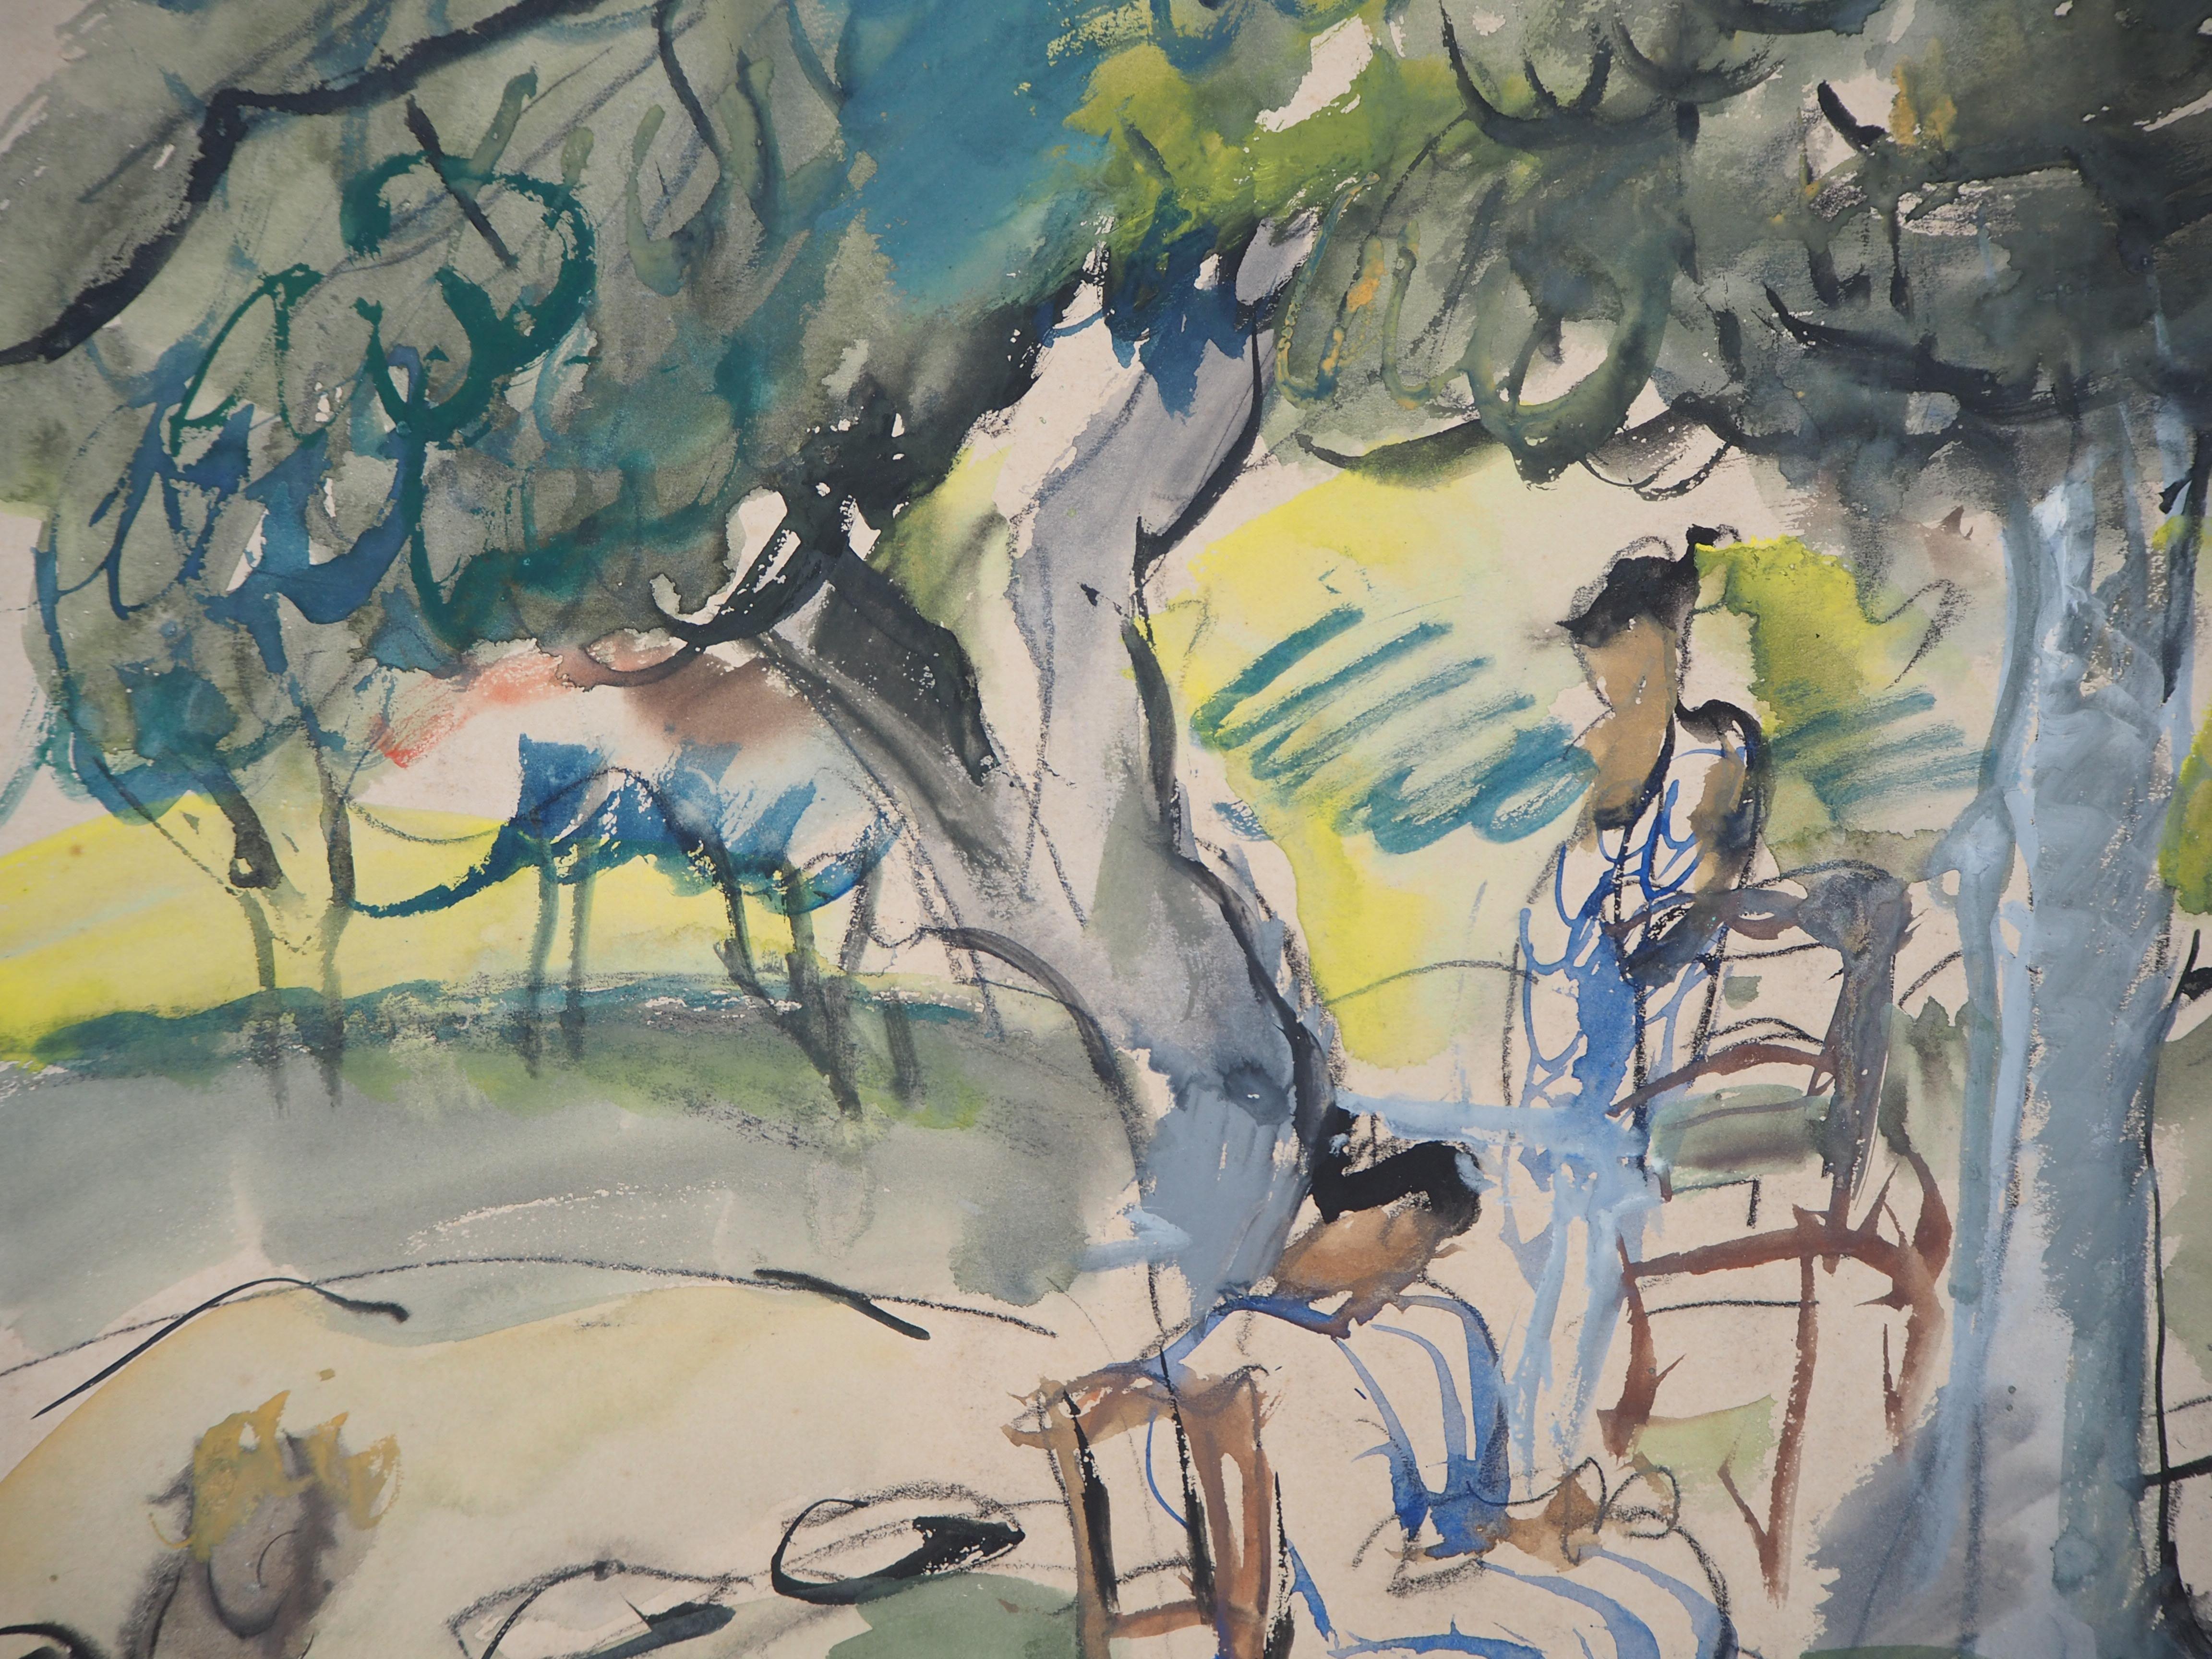 Provence : A Rest under the Trees - Original handsigned gouache & watercolor 1